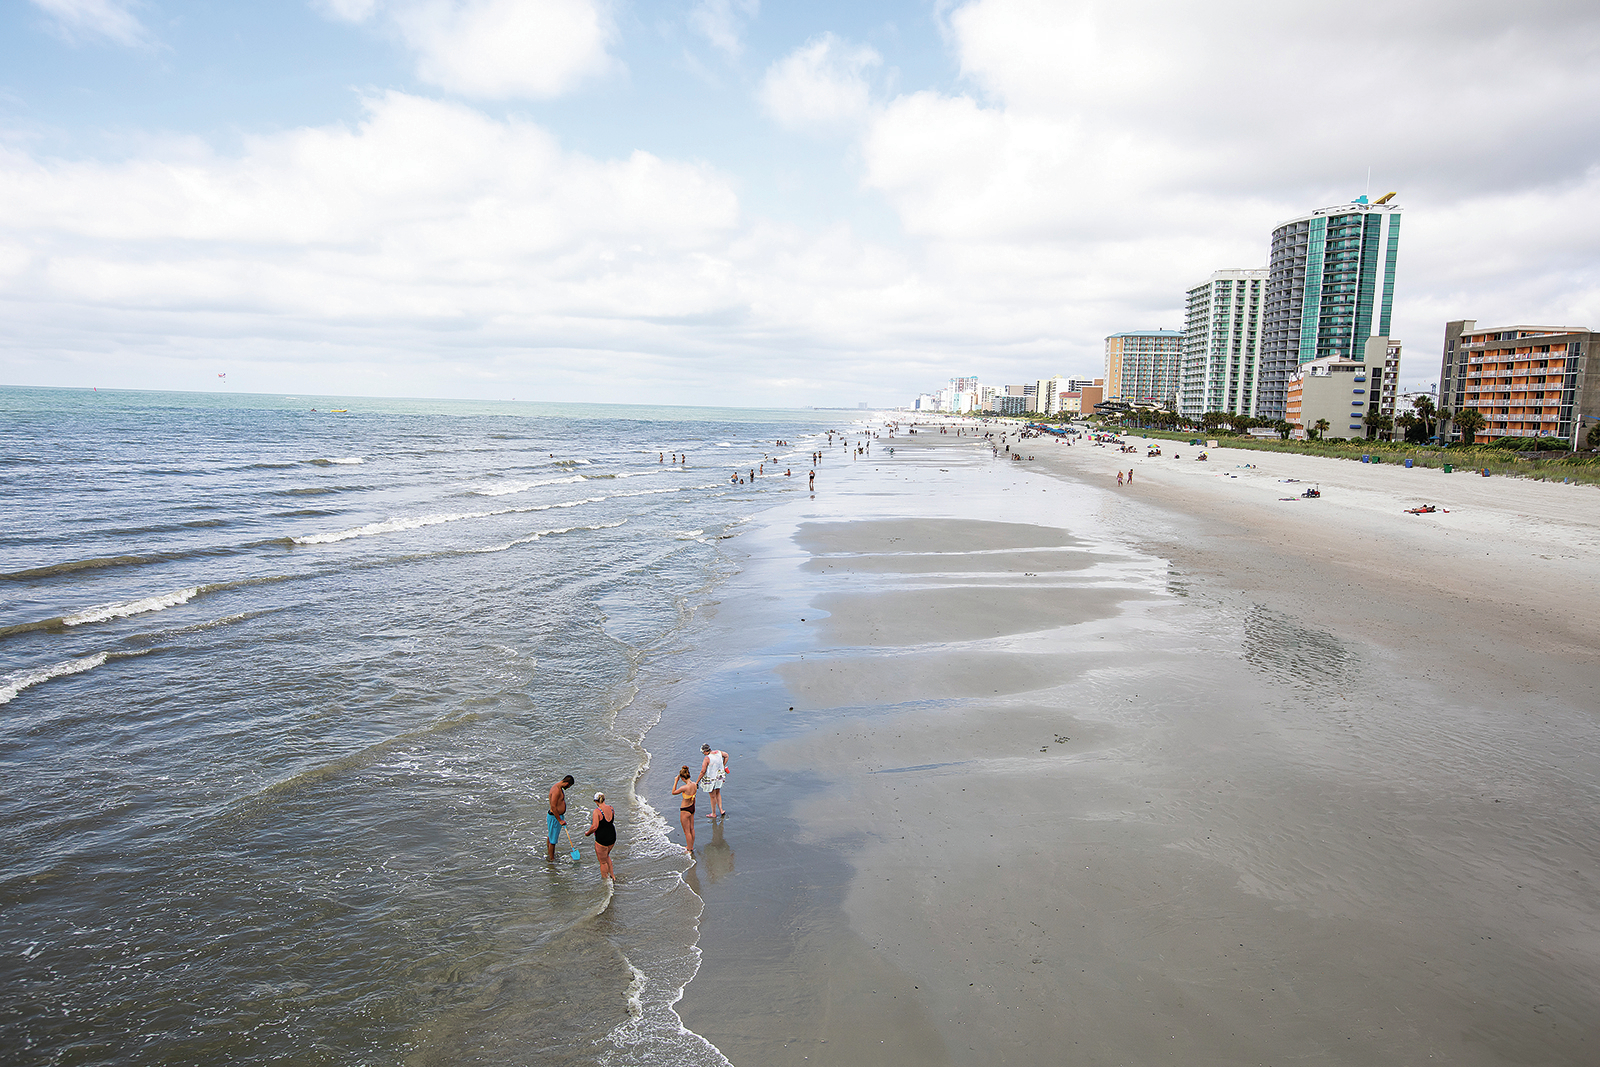 Myrtle Beach doesn't want to be 'Dirty Myrtle' anymore